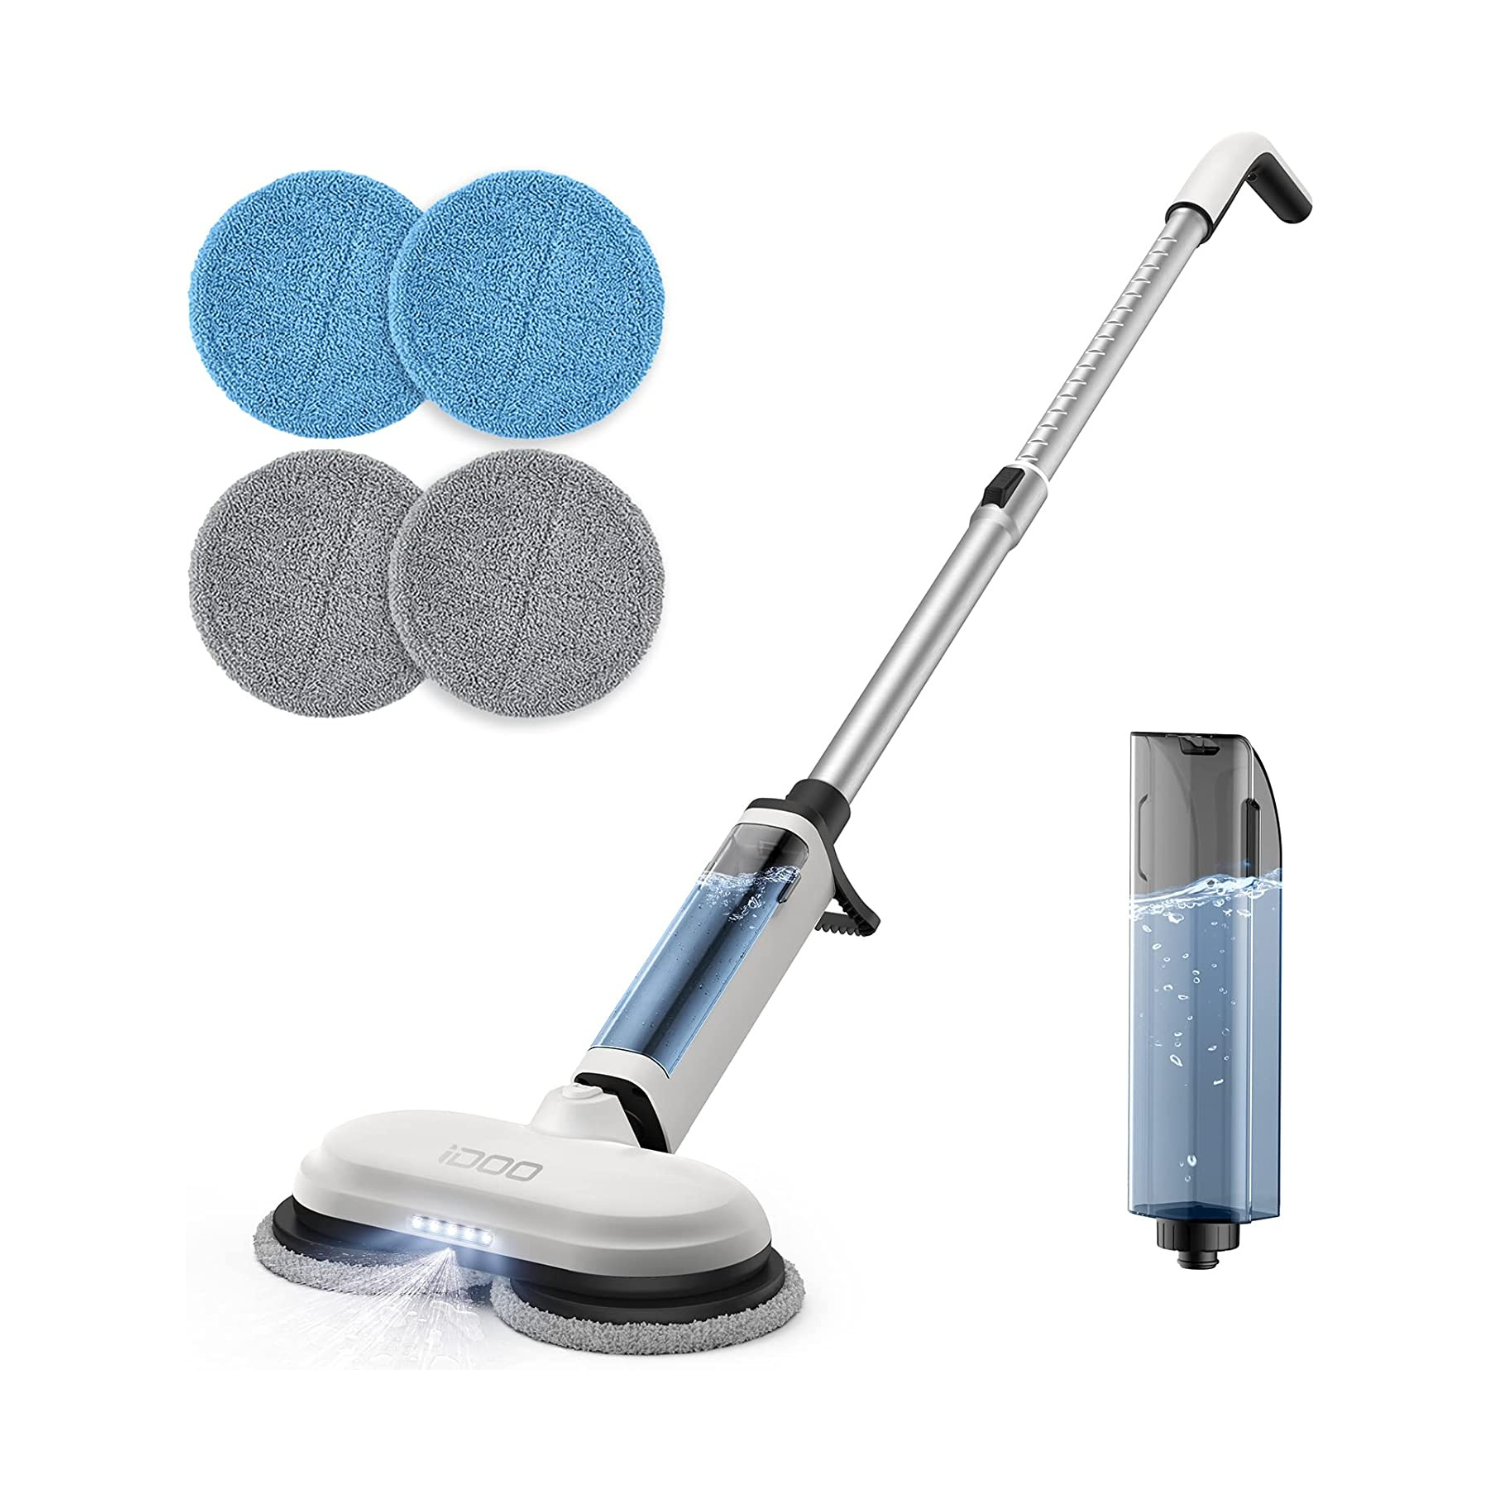 Cordless Electric Mop - Home Appliances by idoo